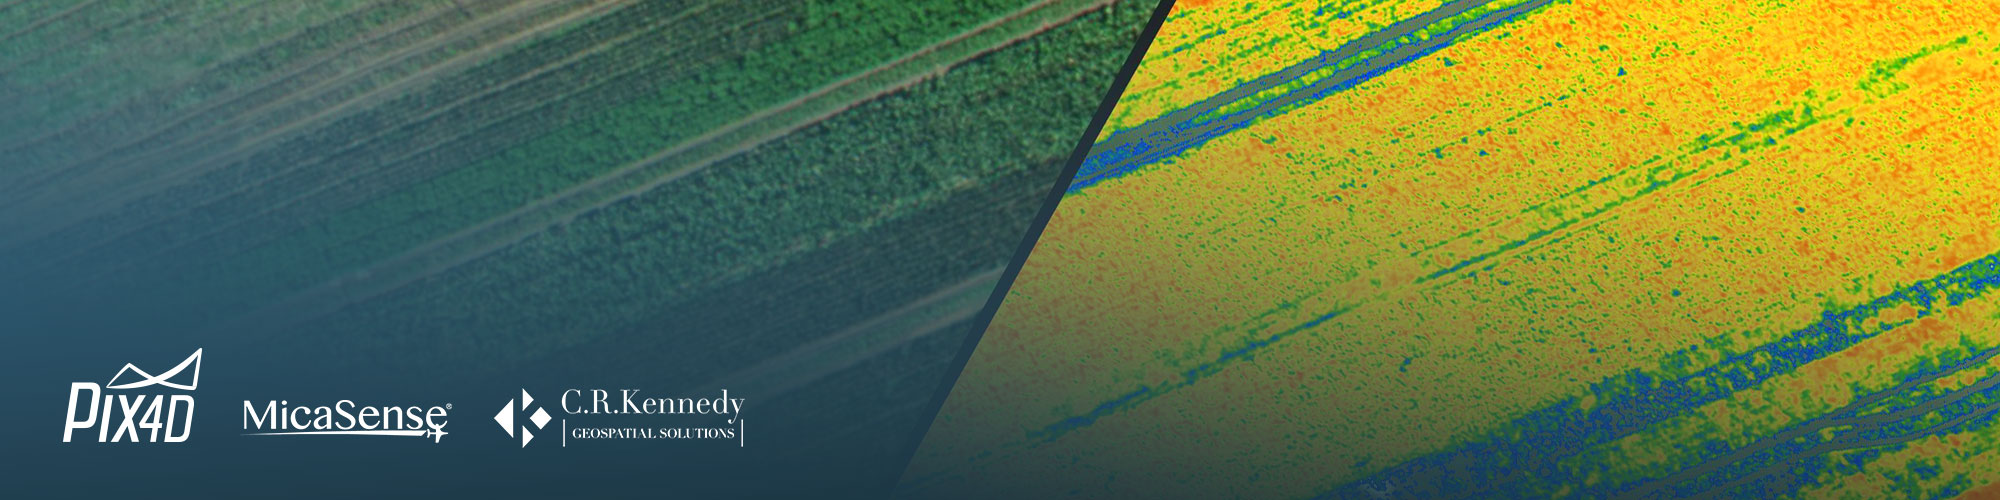 Processing workflow and applications of multispectral imagery with MicaSense and Pix4Dfields